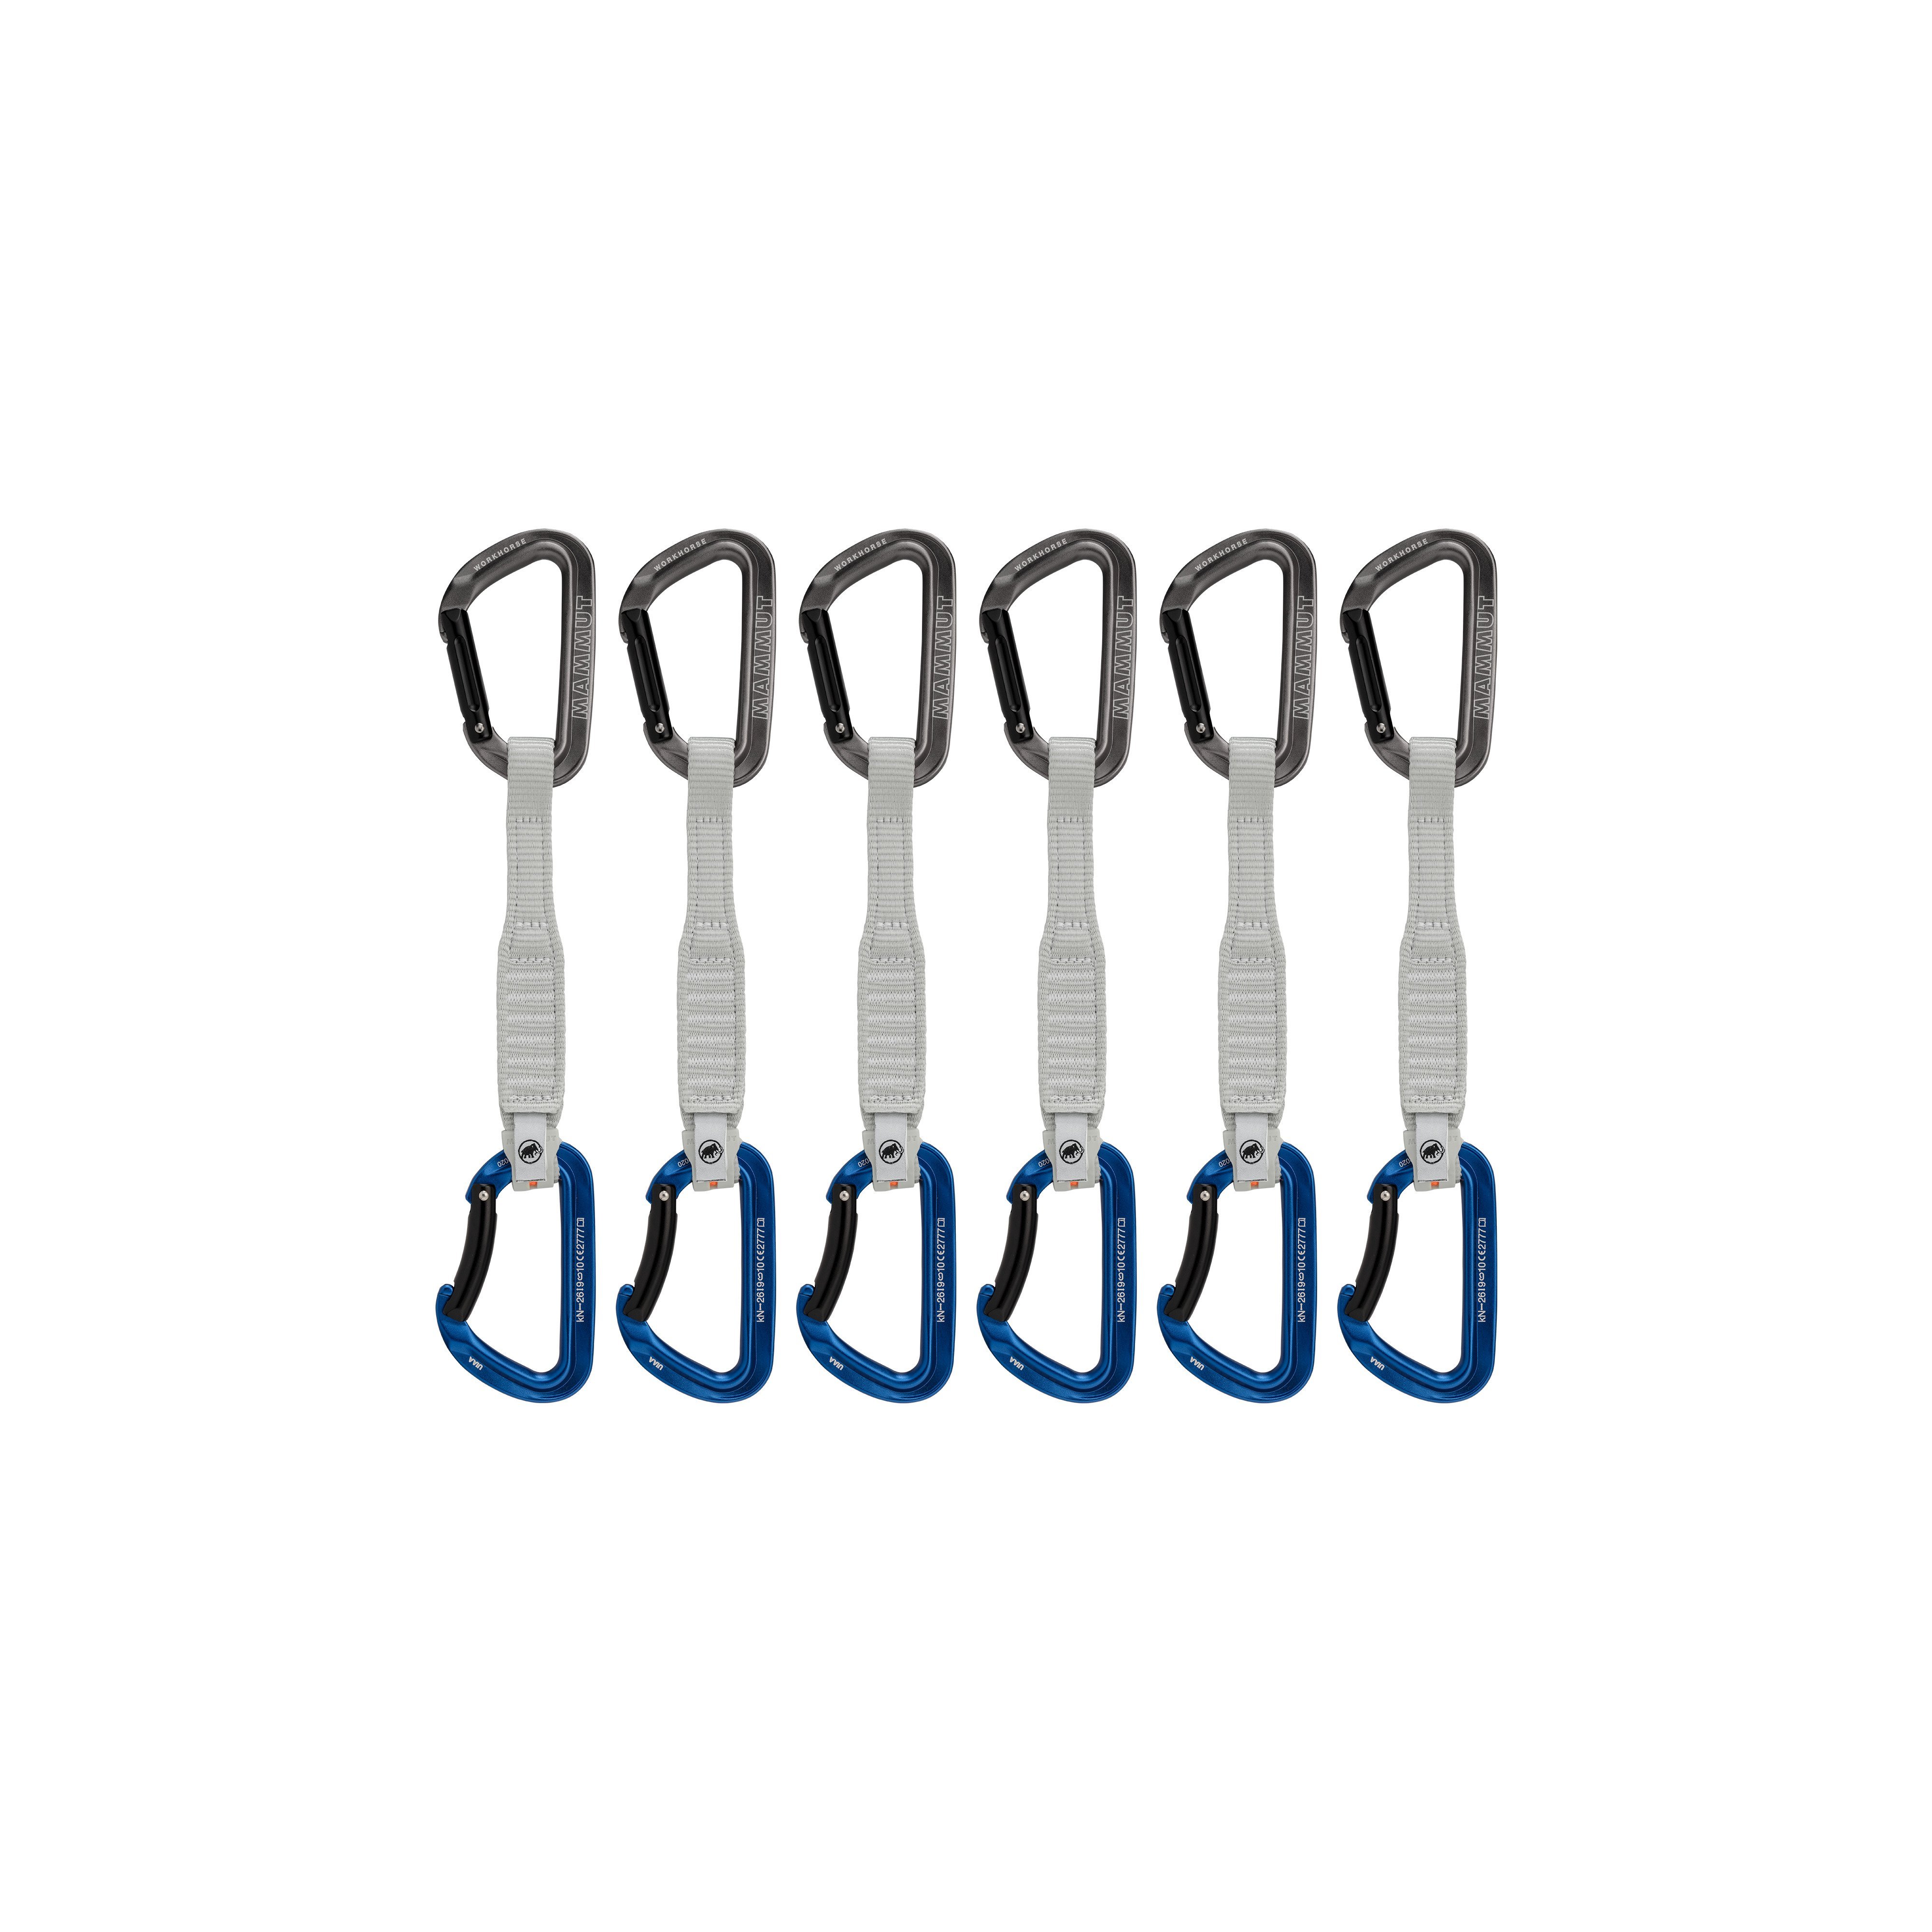 Workhorse Keylock 17 cm 6-Pack Quickdraws - 17 cm product image